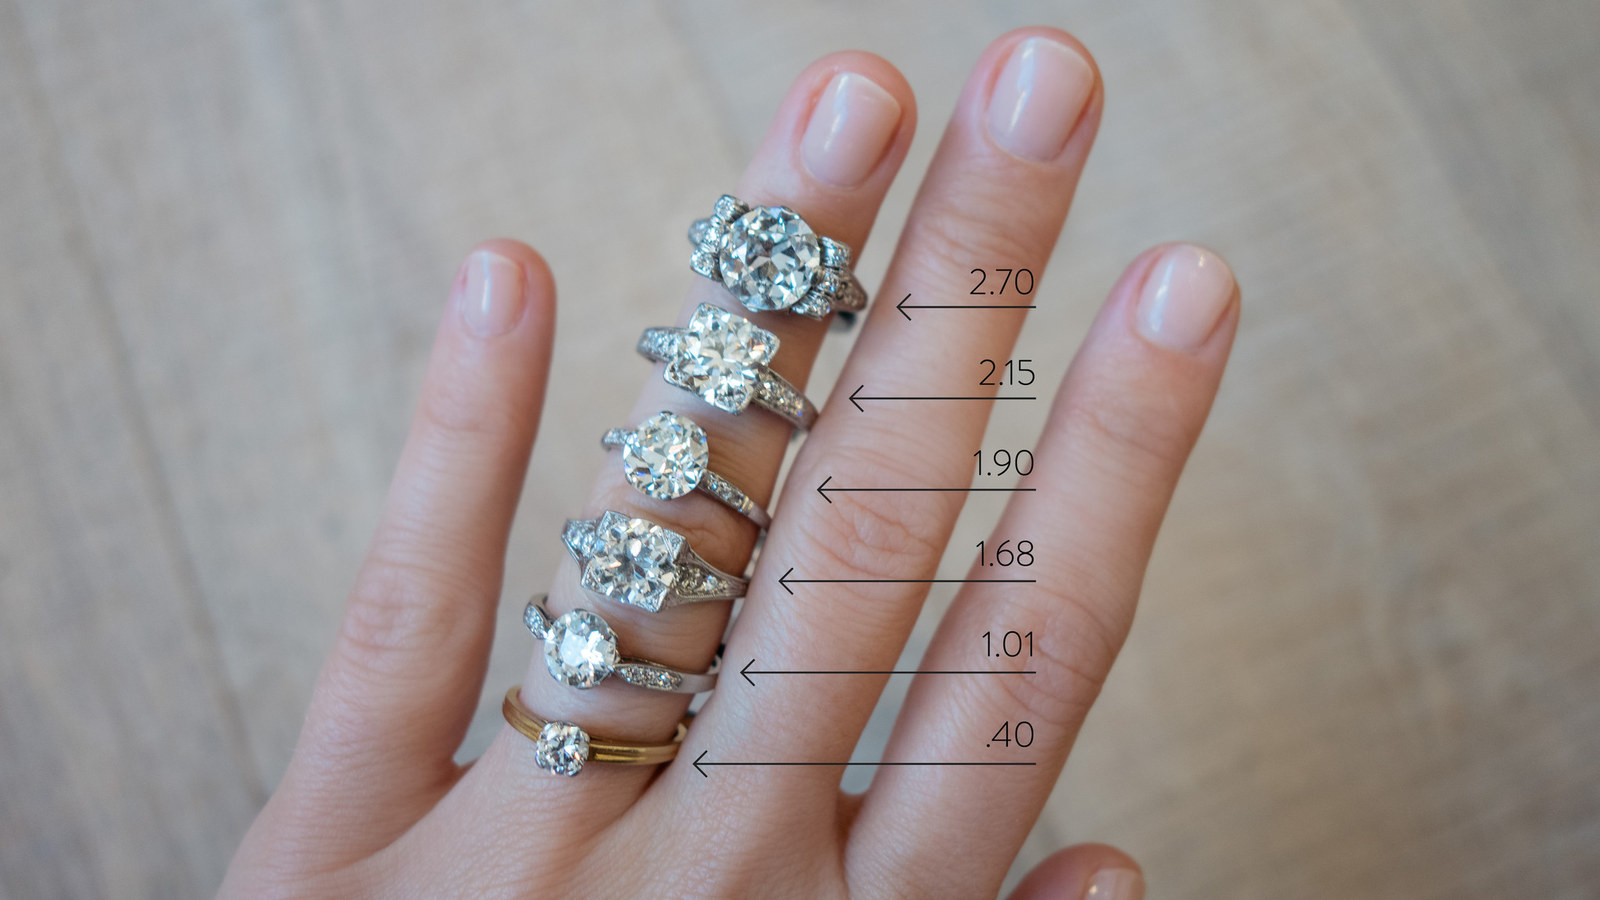 16 Things Everyone Should Know Before Buying An Engagement Ring